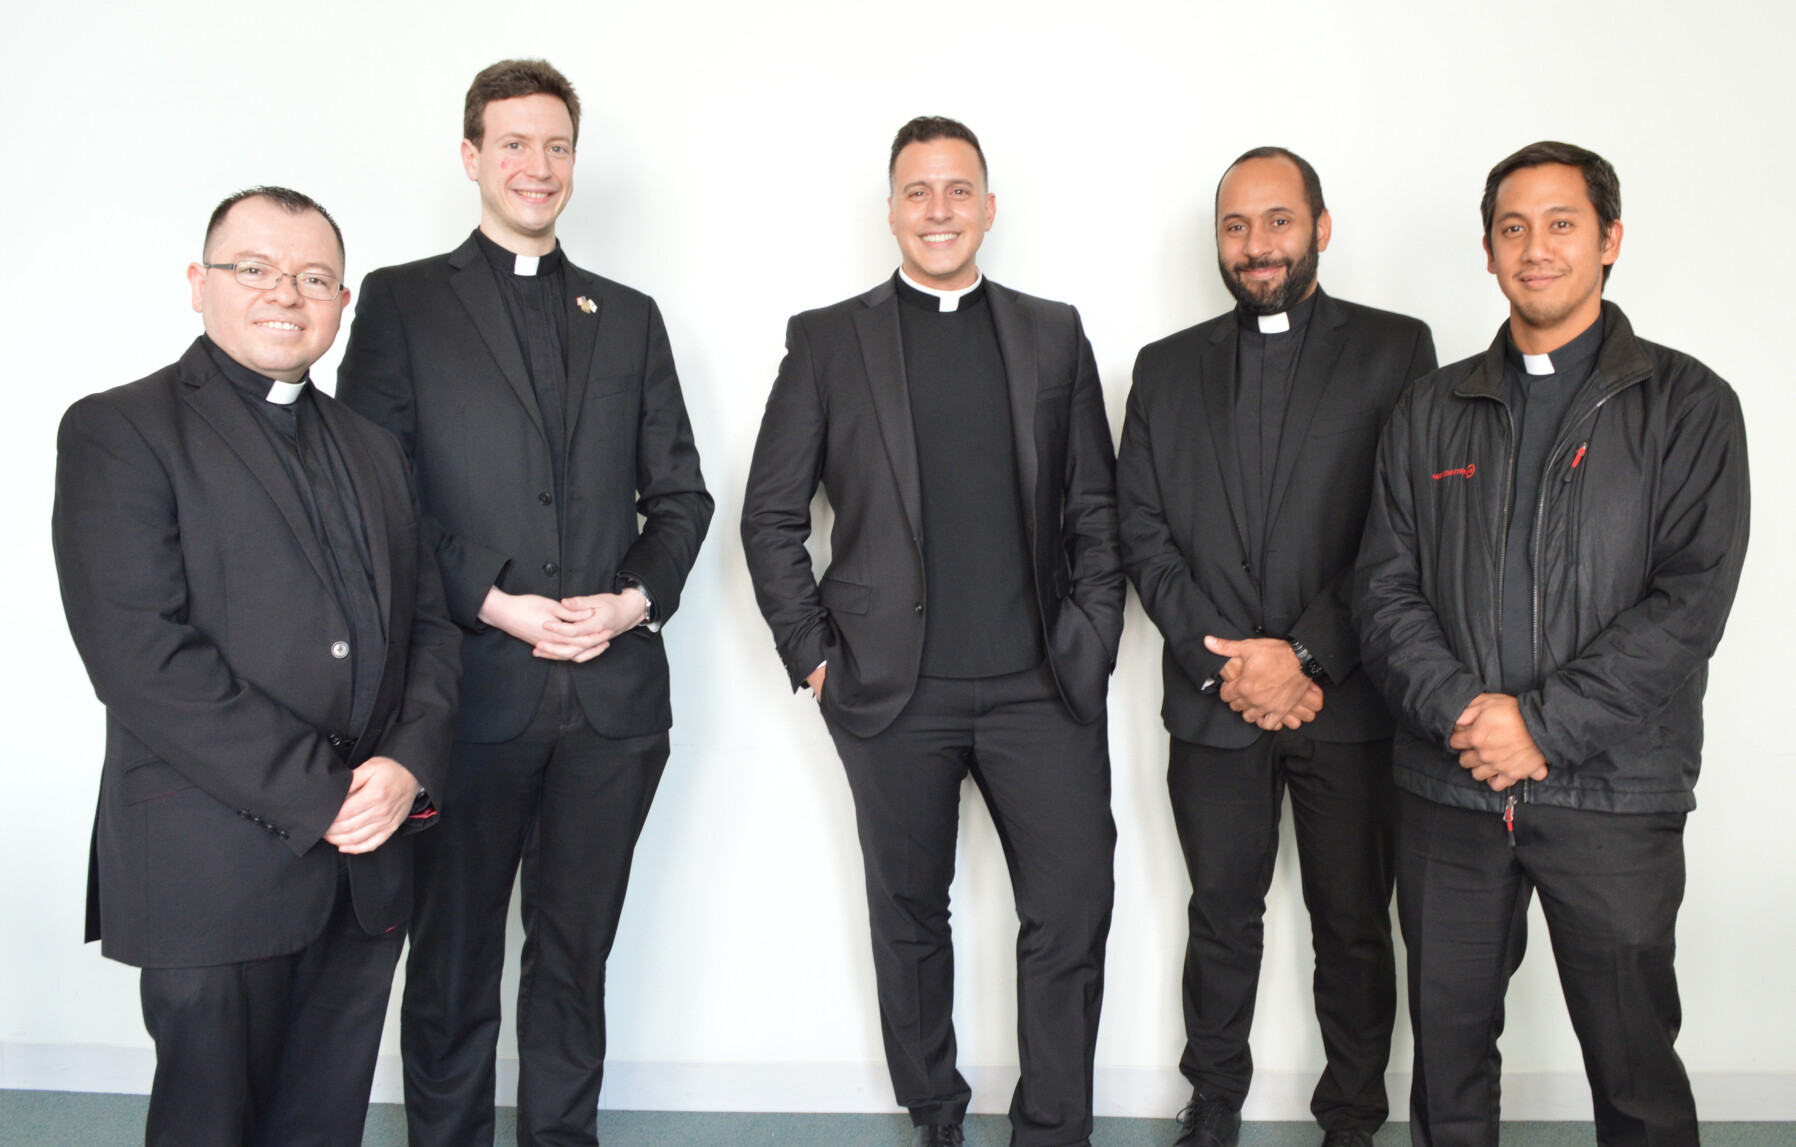 The five men ordained priests for the Archdiocese of Newark on May 29, 2021 from left to right: Moris Montoya, Christian G. Scalo, Lynx J.M. Soliman, Luis Carlos Rodrigues de Araujo, and Gabriel Celis Camacho. (Photo by Jai Agnish/Archdiocese of Newark)